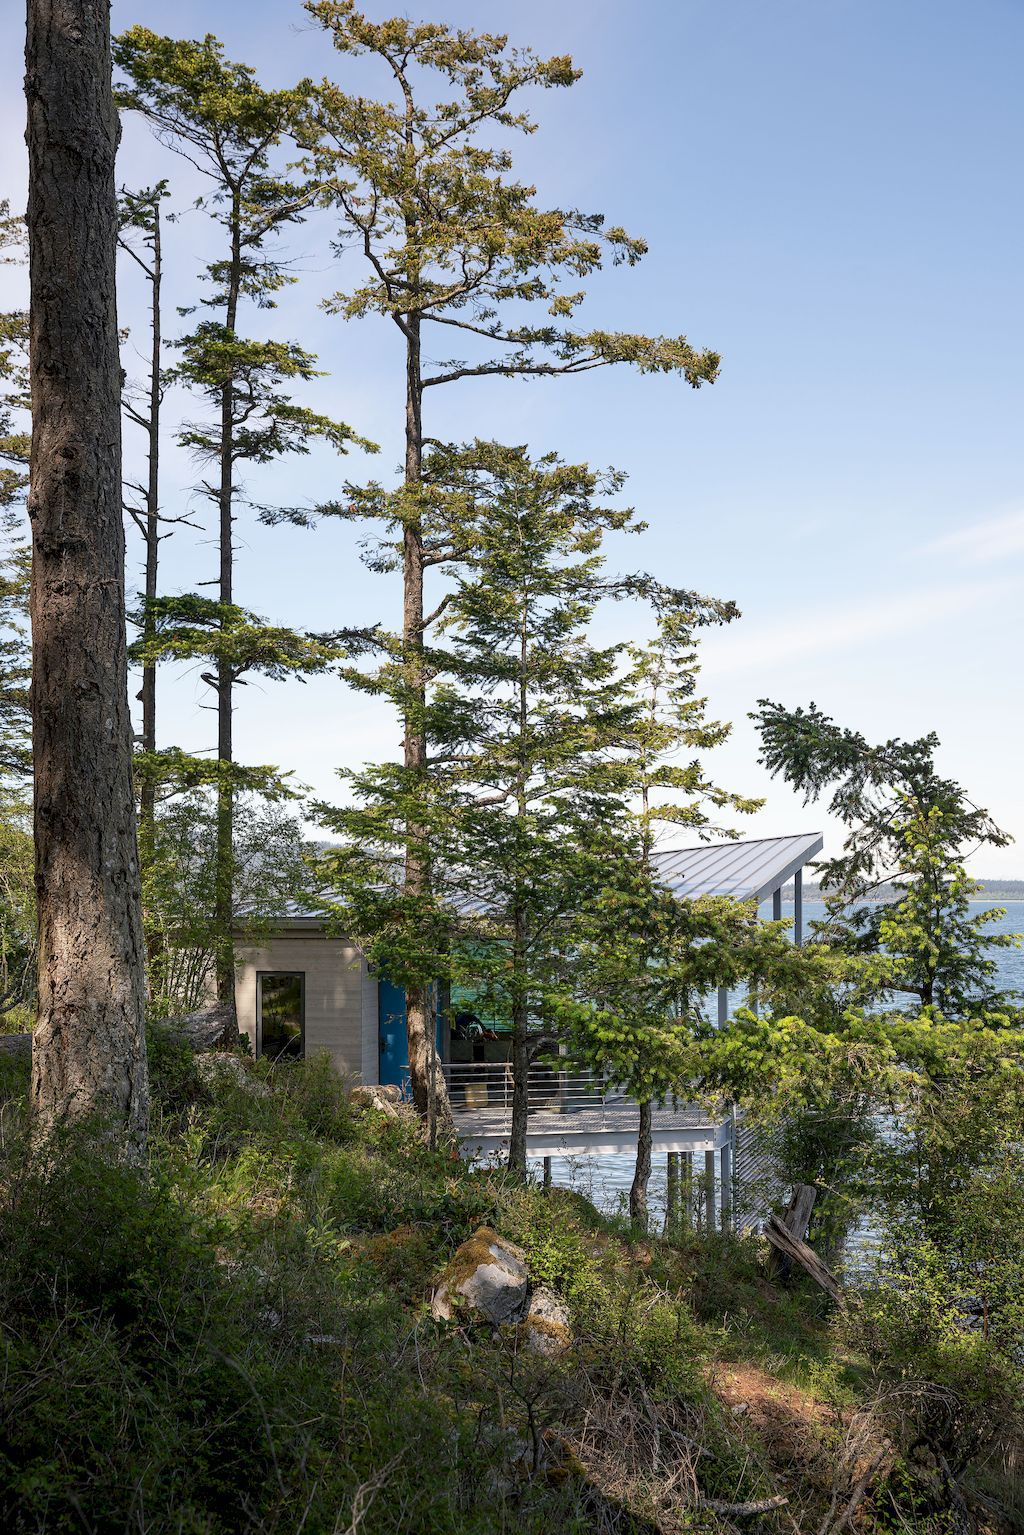 Boathouse, prominent on the sea by Prentiss+Balance+Wickline Architects